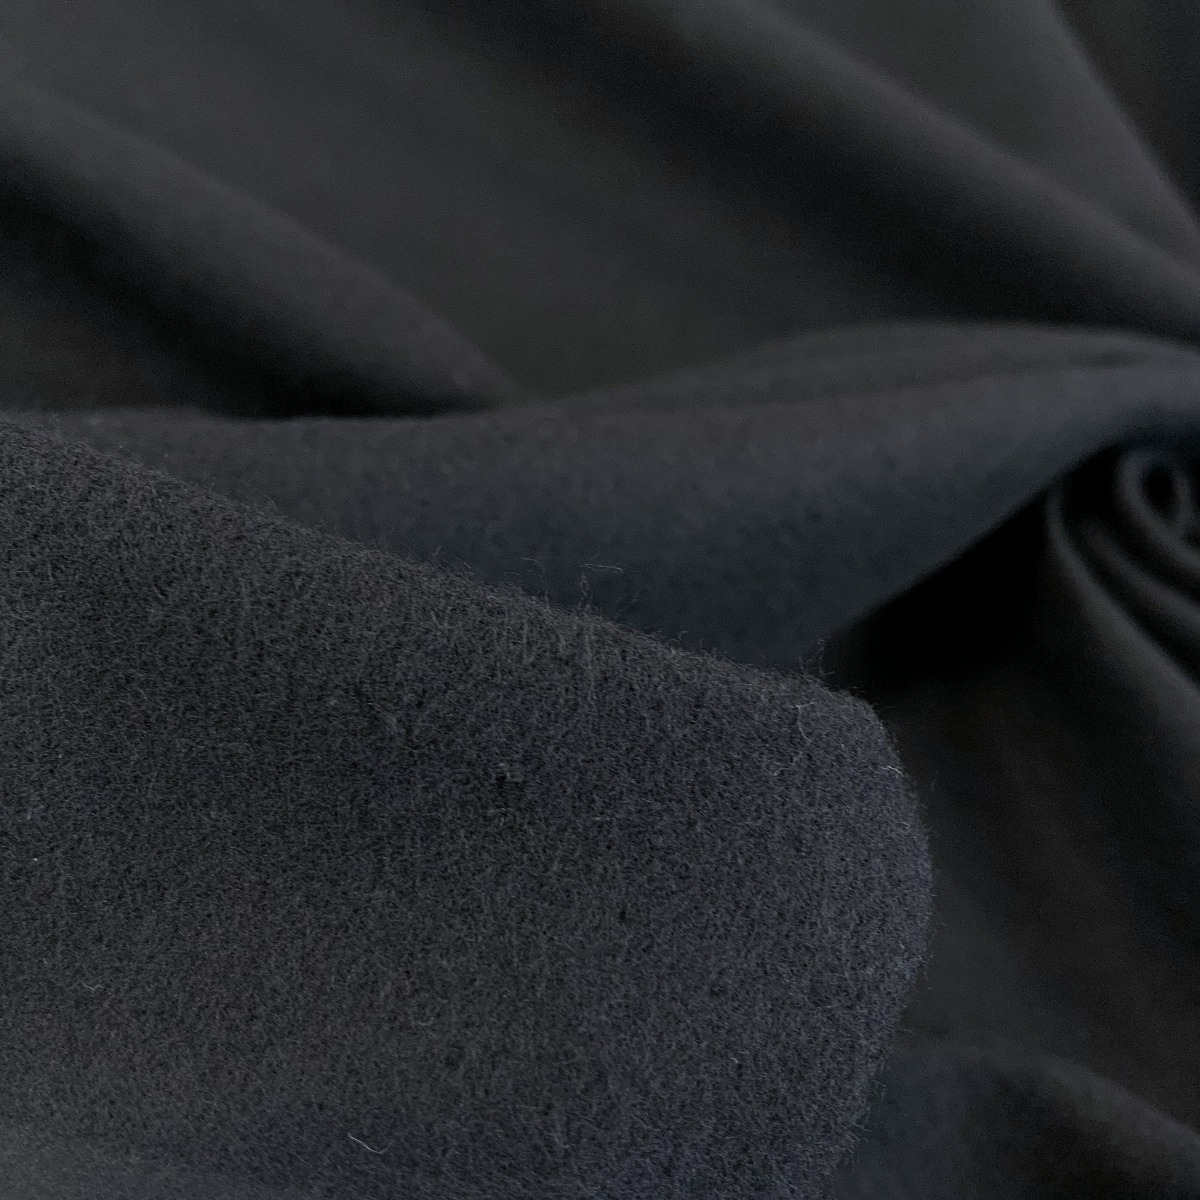 https://www.croftmill.co.uk/images/pictures/2-2021/01-january-2021/winceyette-plain-black-cotton-flannel-fabric-close-up.jpg?v=5cb8533f